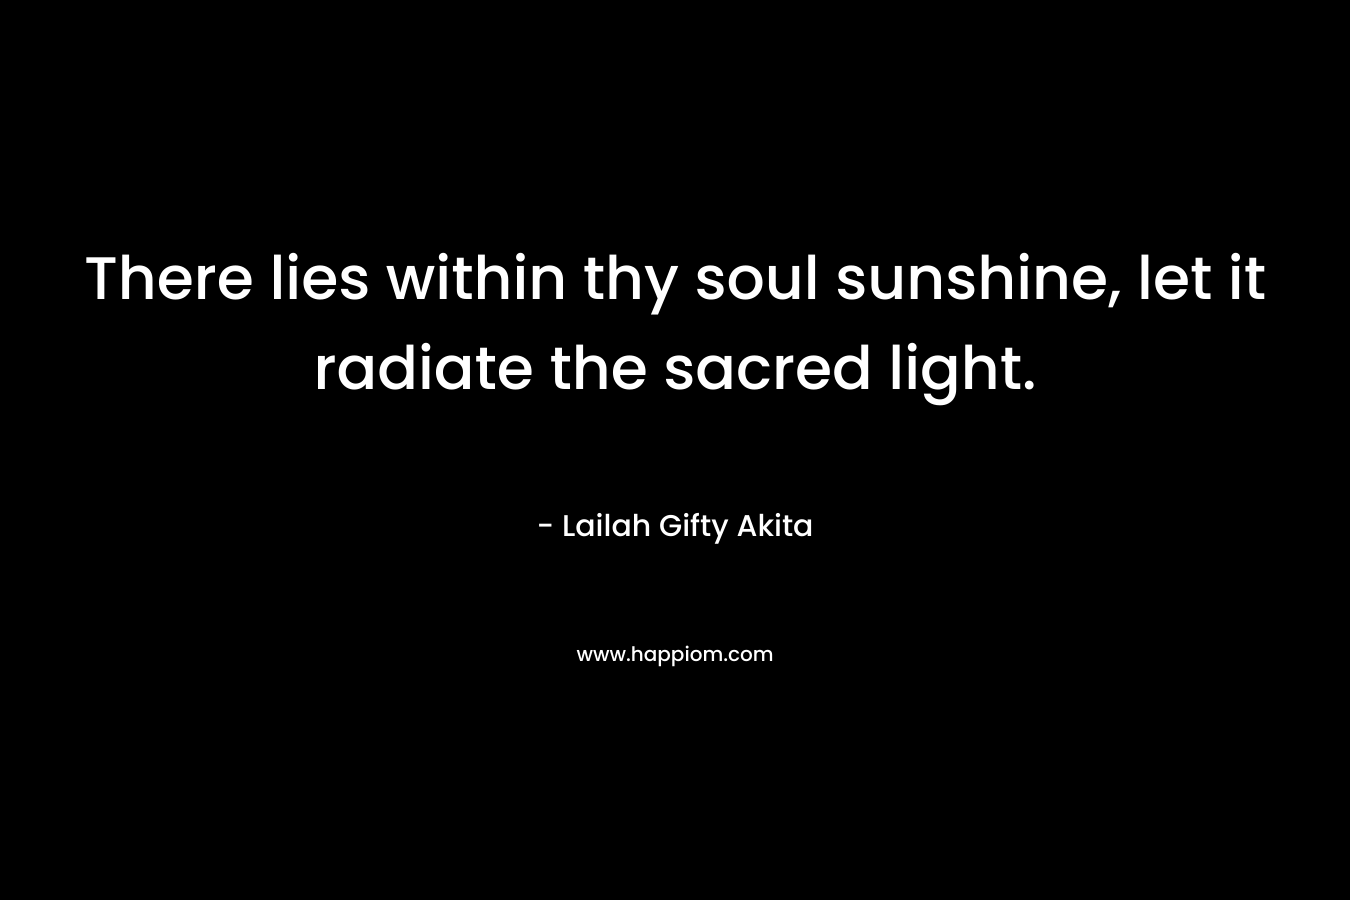 There lies within thy soul sunshine, let it radiate the sacred light.